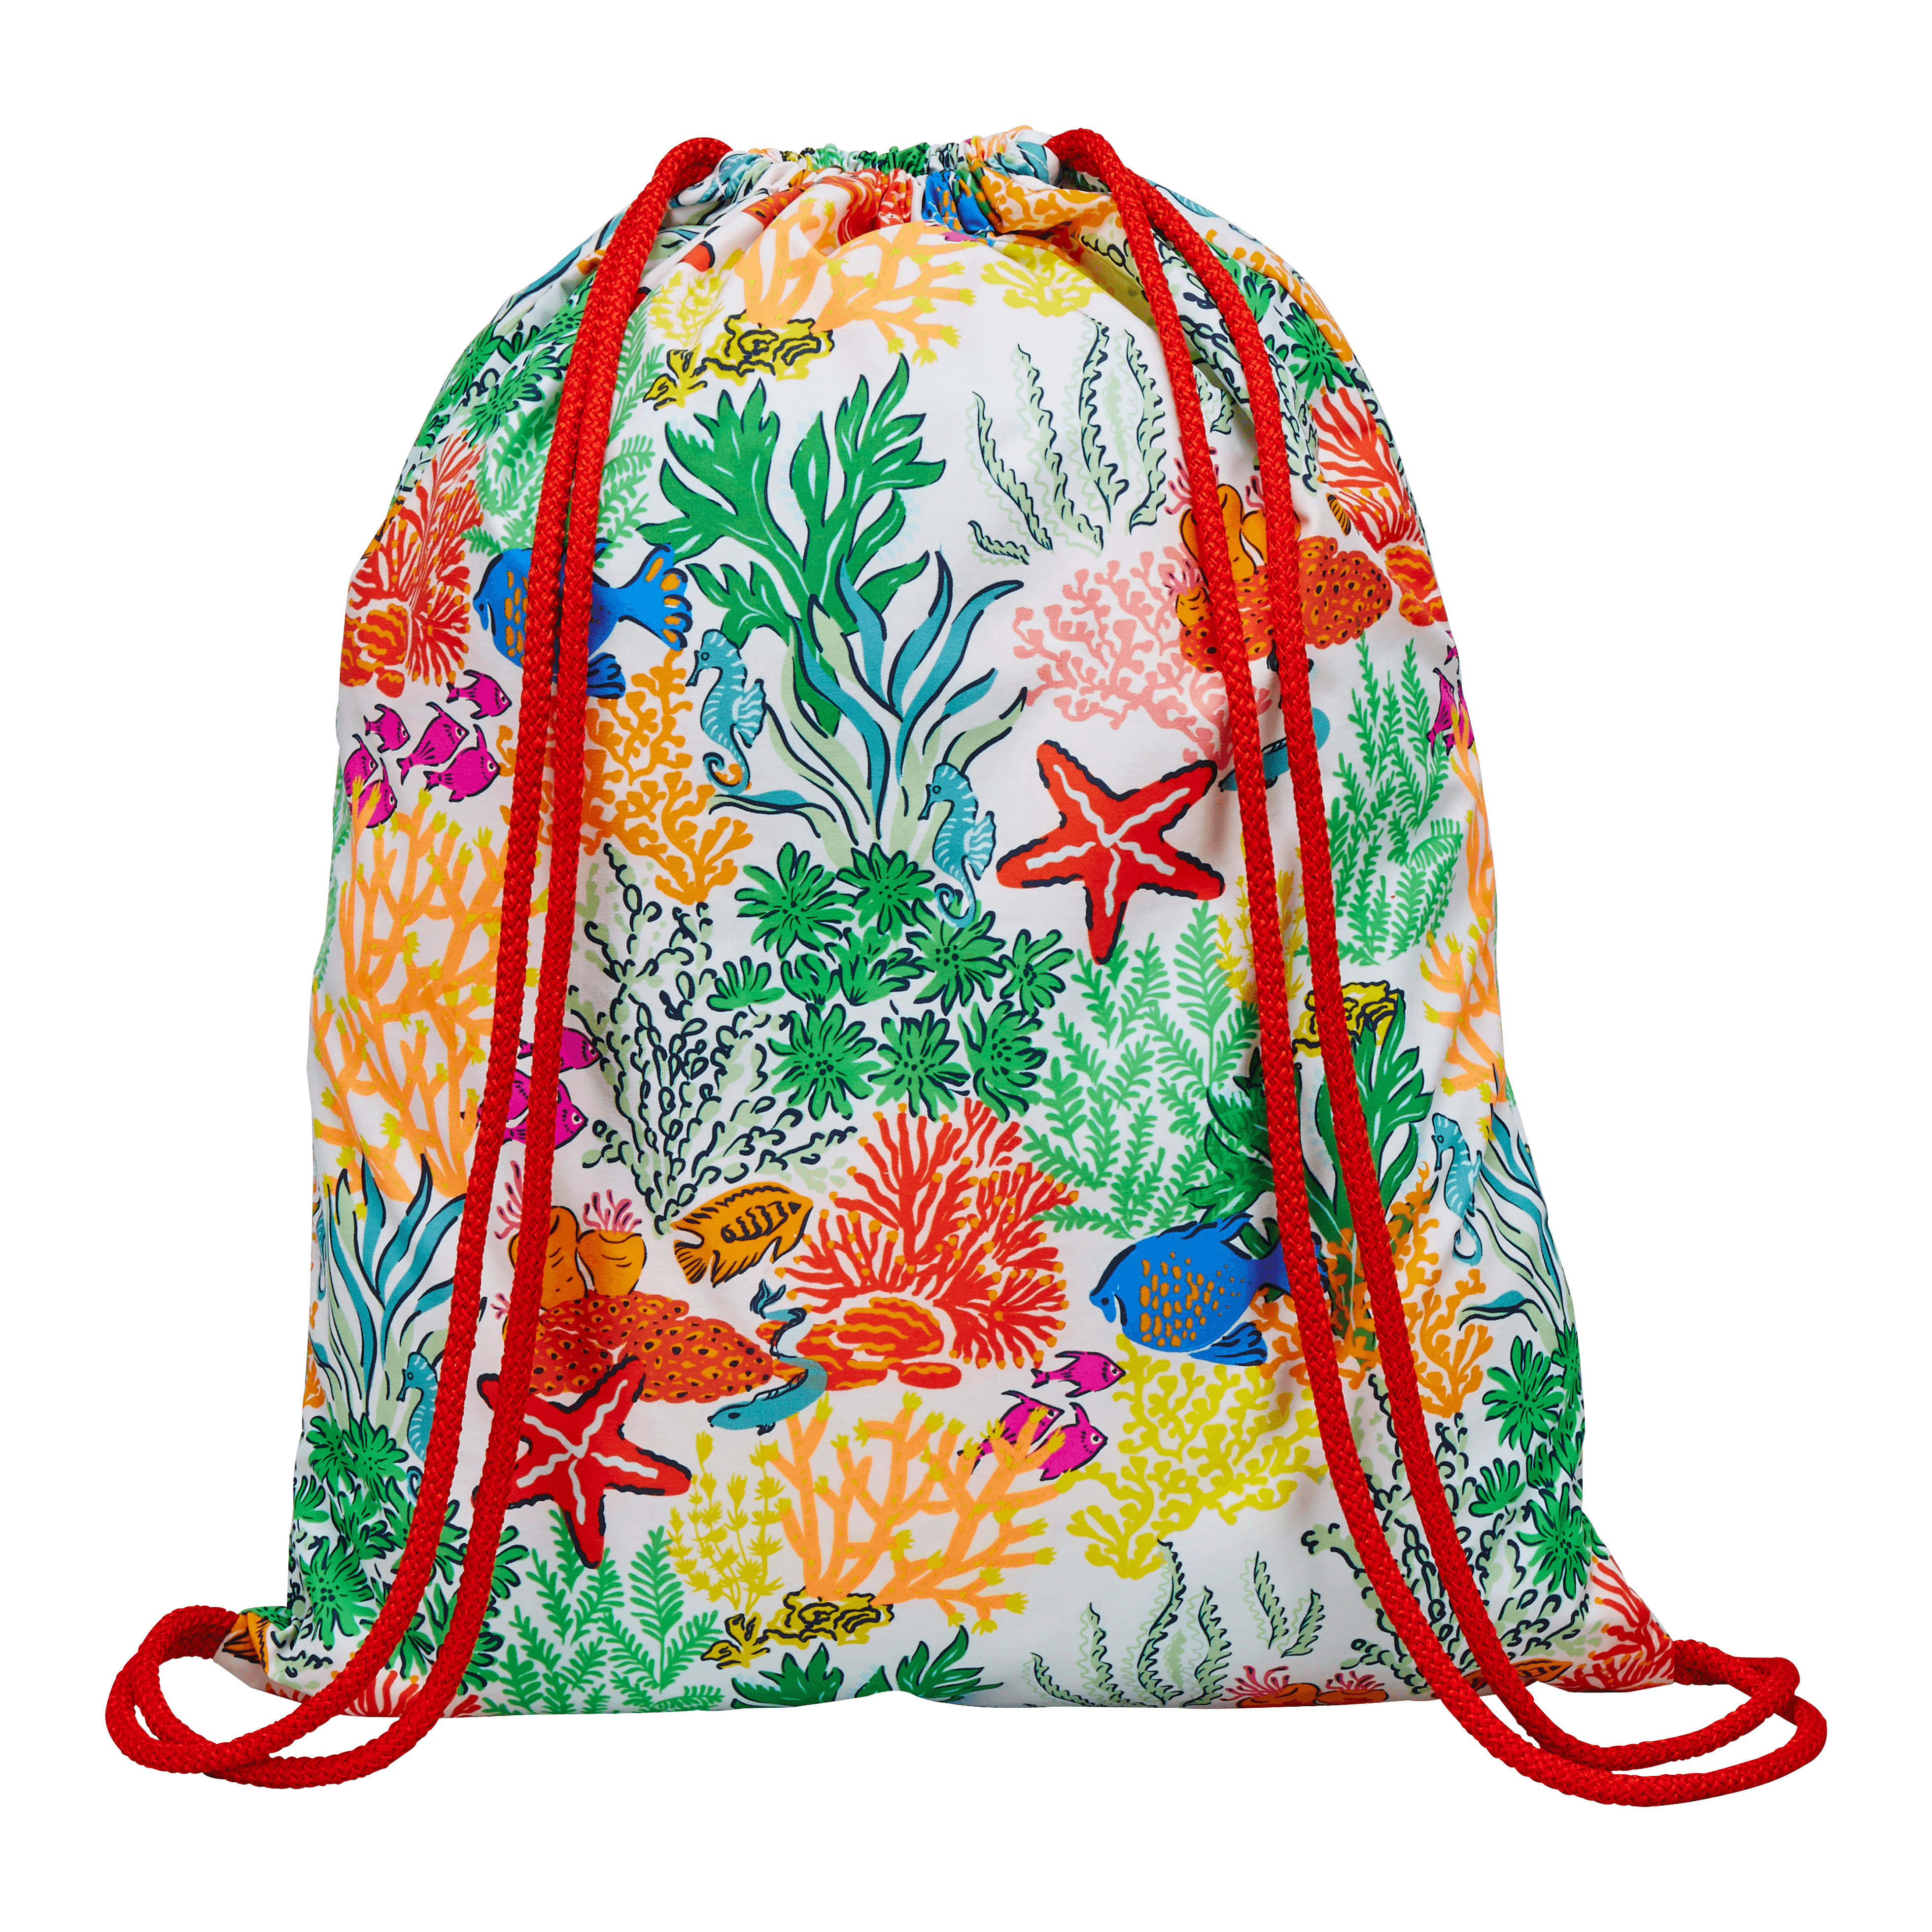 Kids Backpack Fonds Marins Multicolores - 2